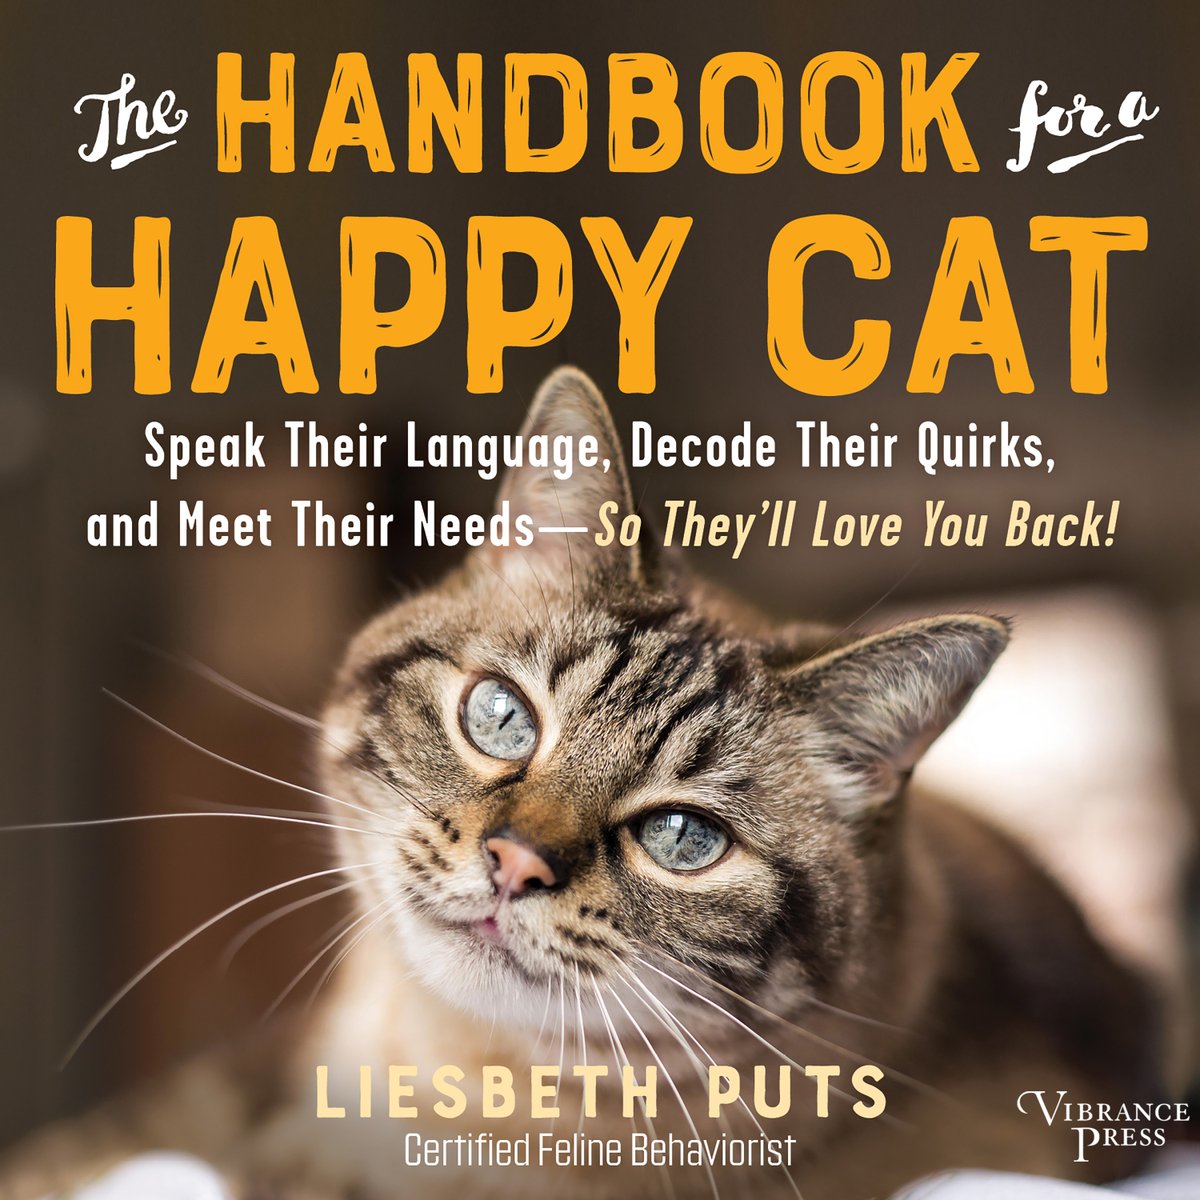 Give your best friend more purr and pounce with this whiskers-to-tail guide to the good life!

THE HANDBOOK FOR A HAPPY CAT, by Liesbeth Puts @PVKattengedrag narrated by Lauren Ezzo @SingleWithFries 

Now in audio from Vibrance Press